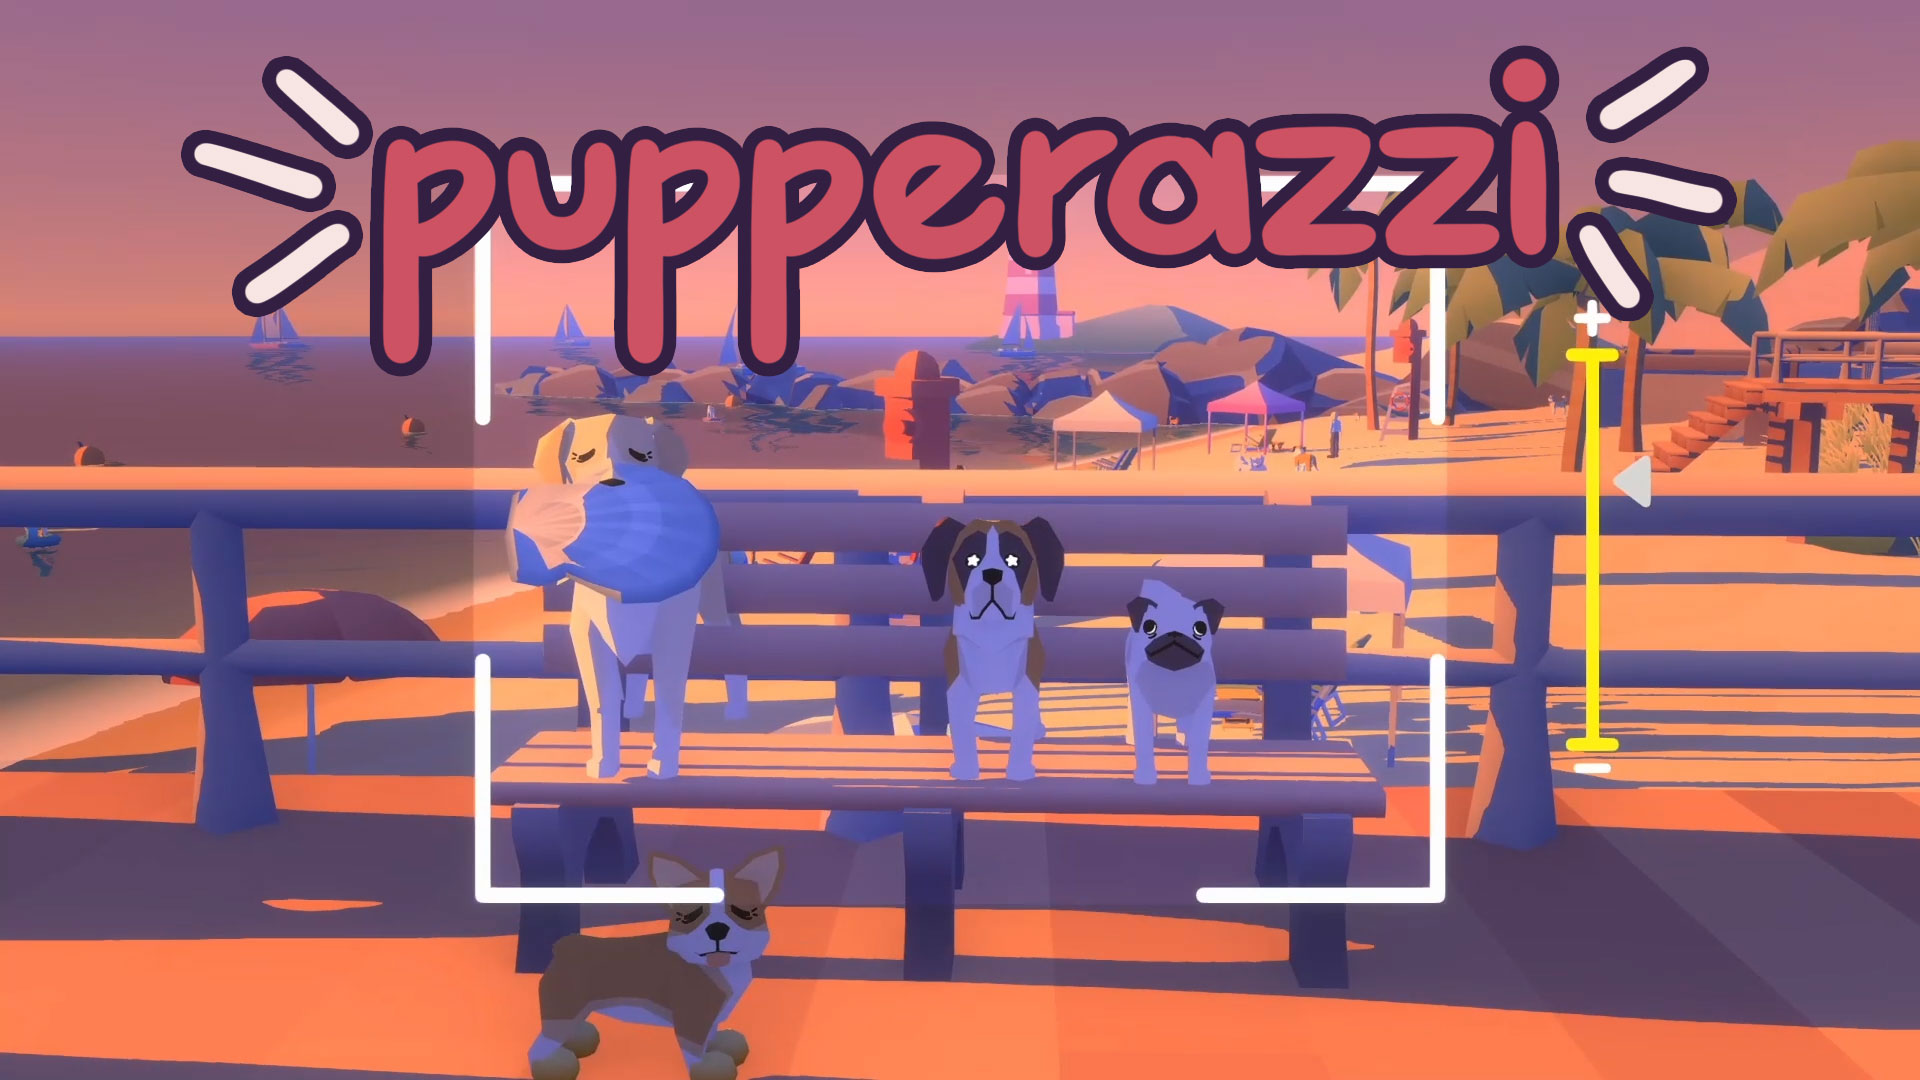 Video For Pupperazzi: How to Take the Best Photos of Dogs, the Most Powerful Beings on Earth